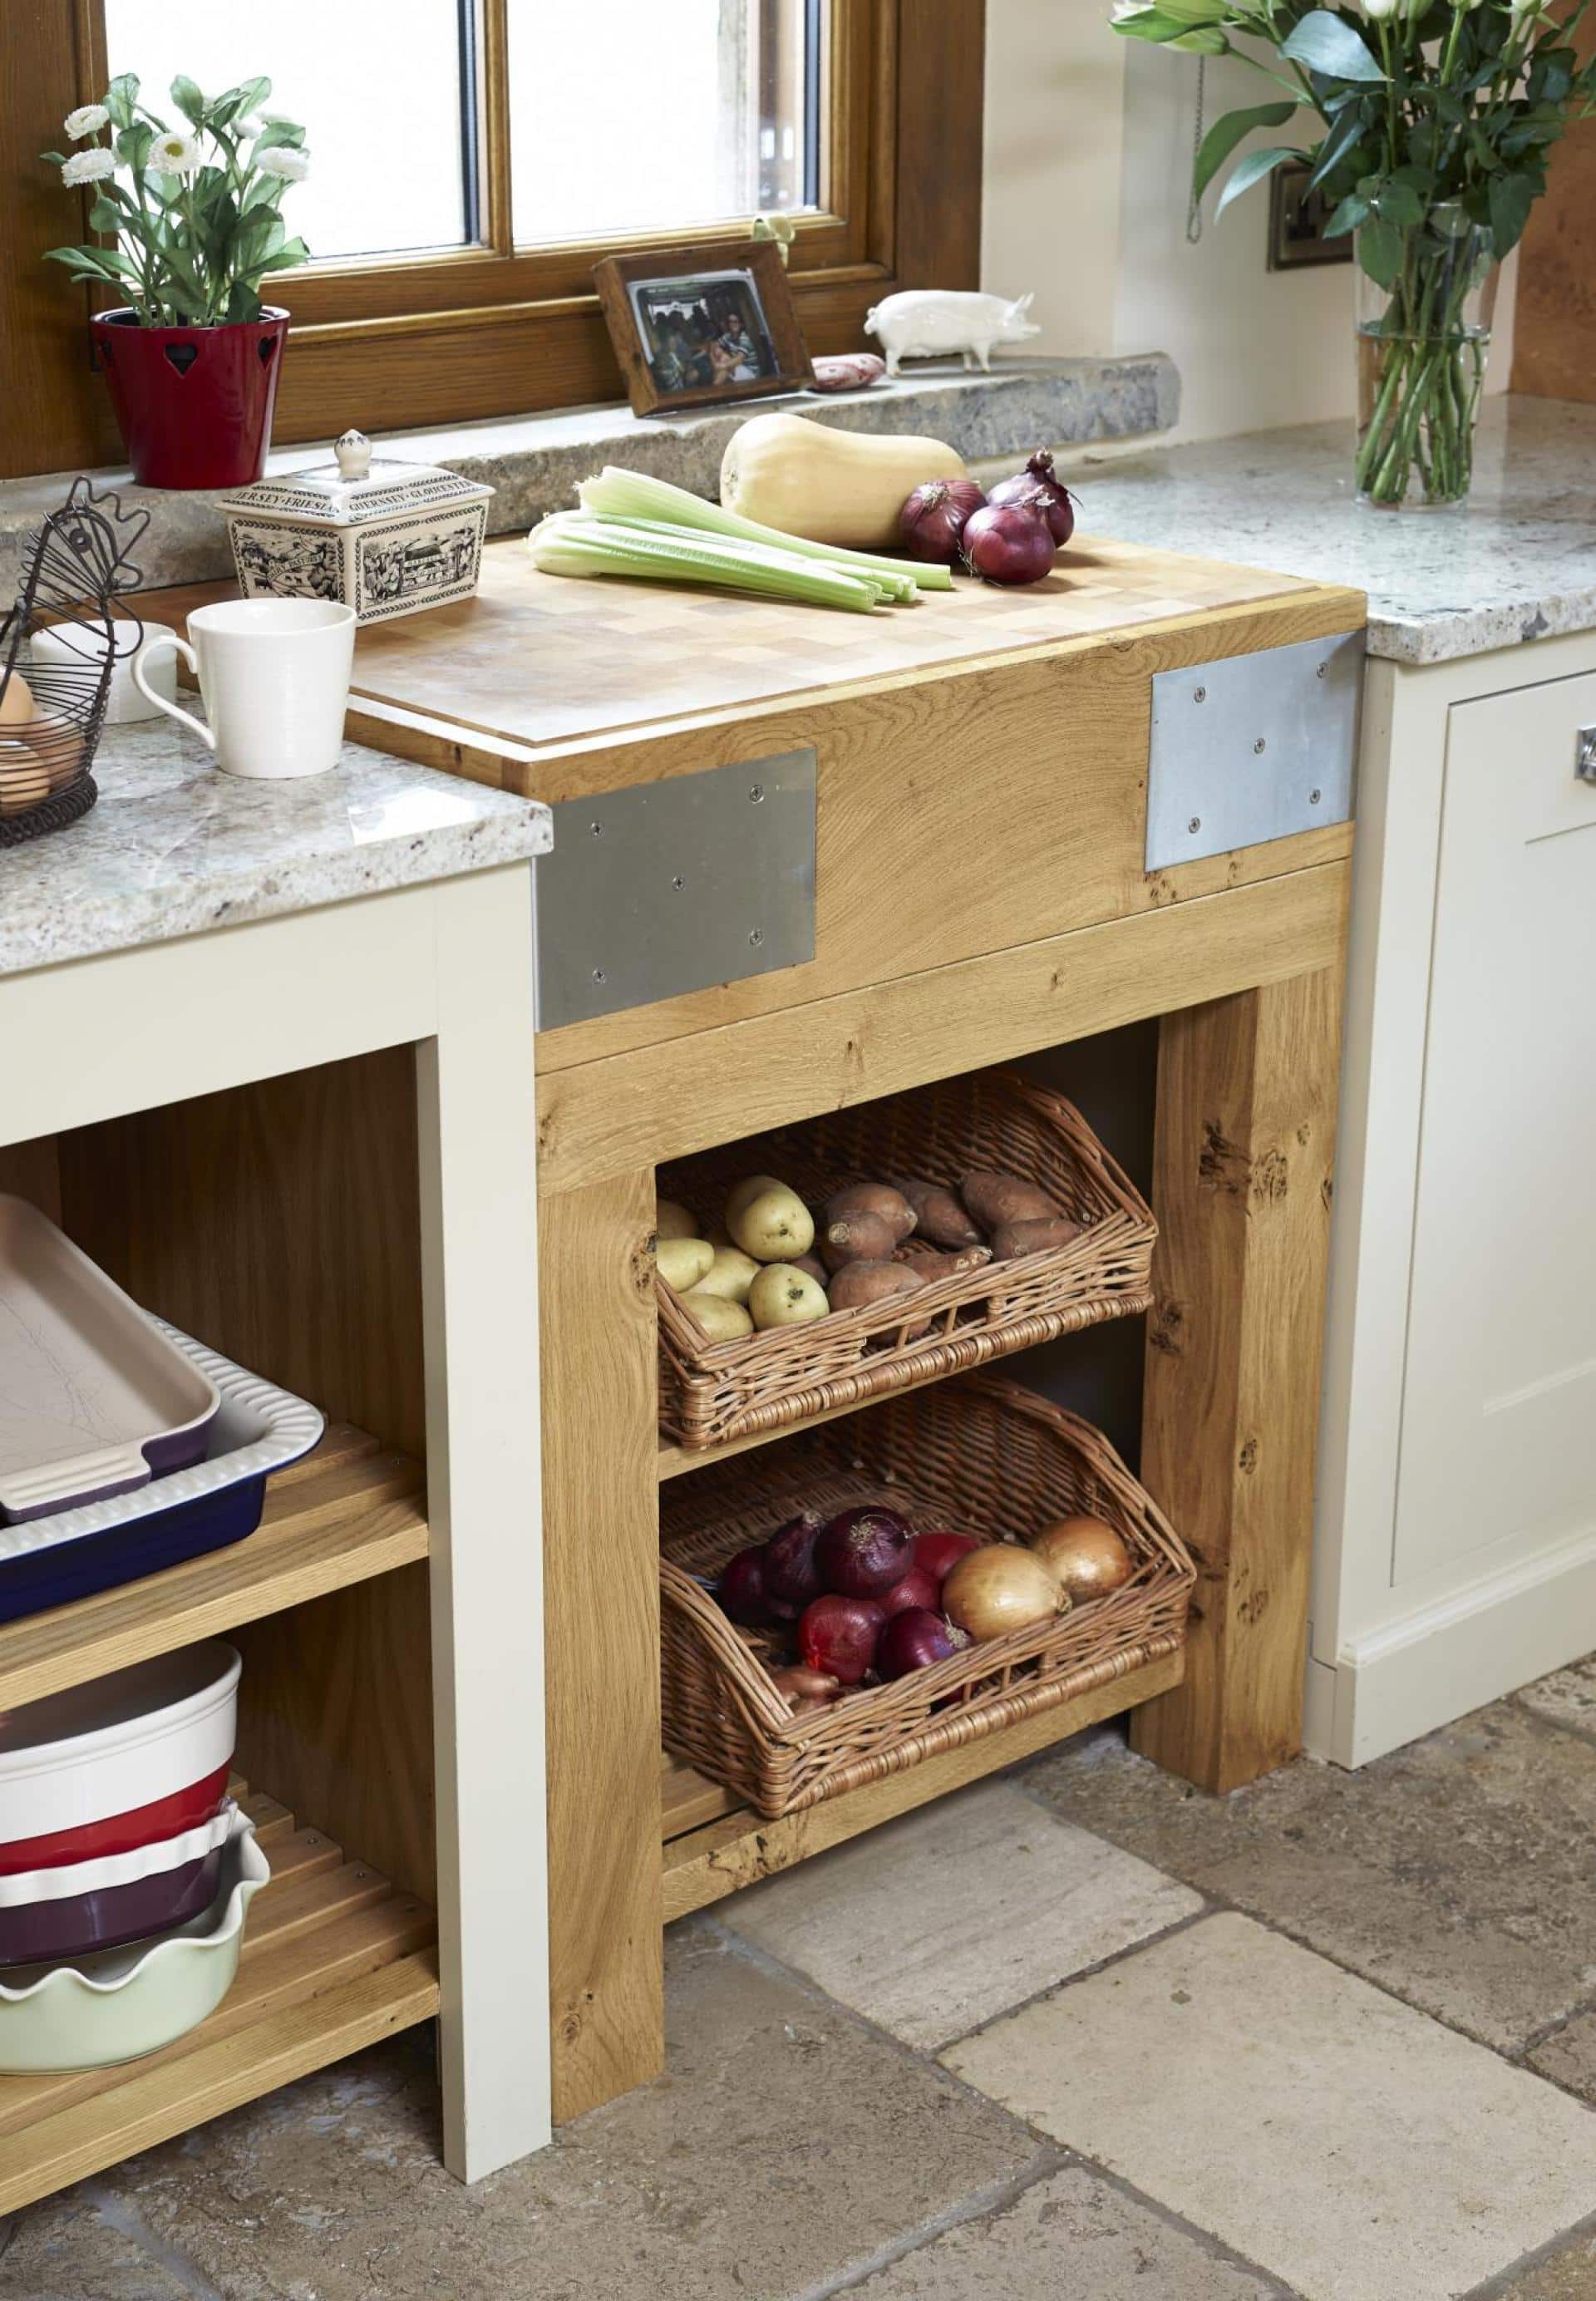 Pippy oak & hand-painted kitchen 1